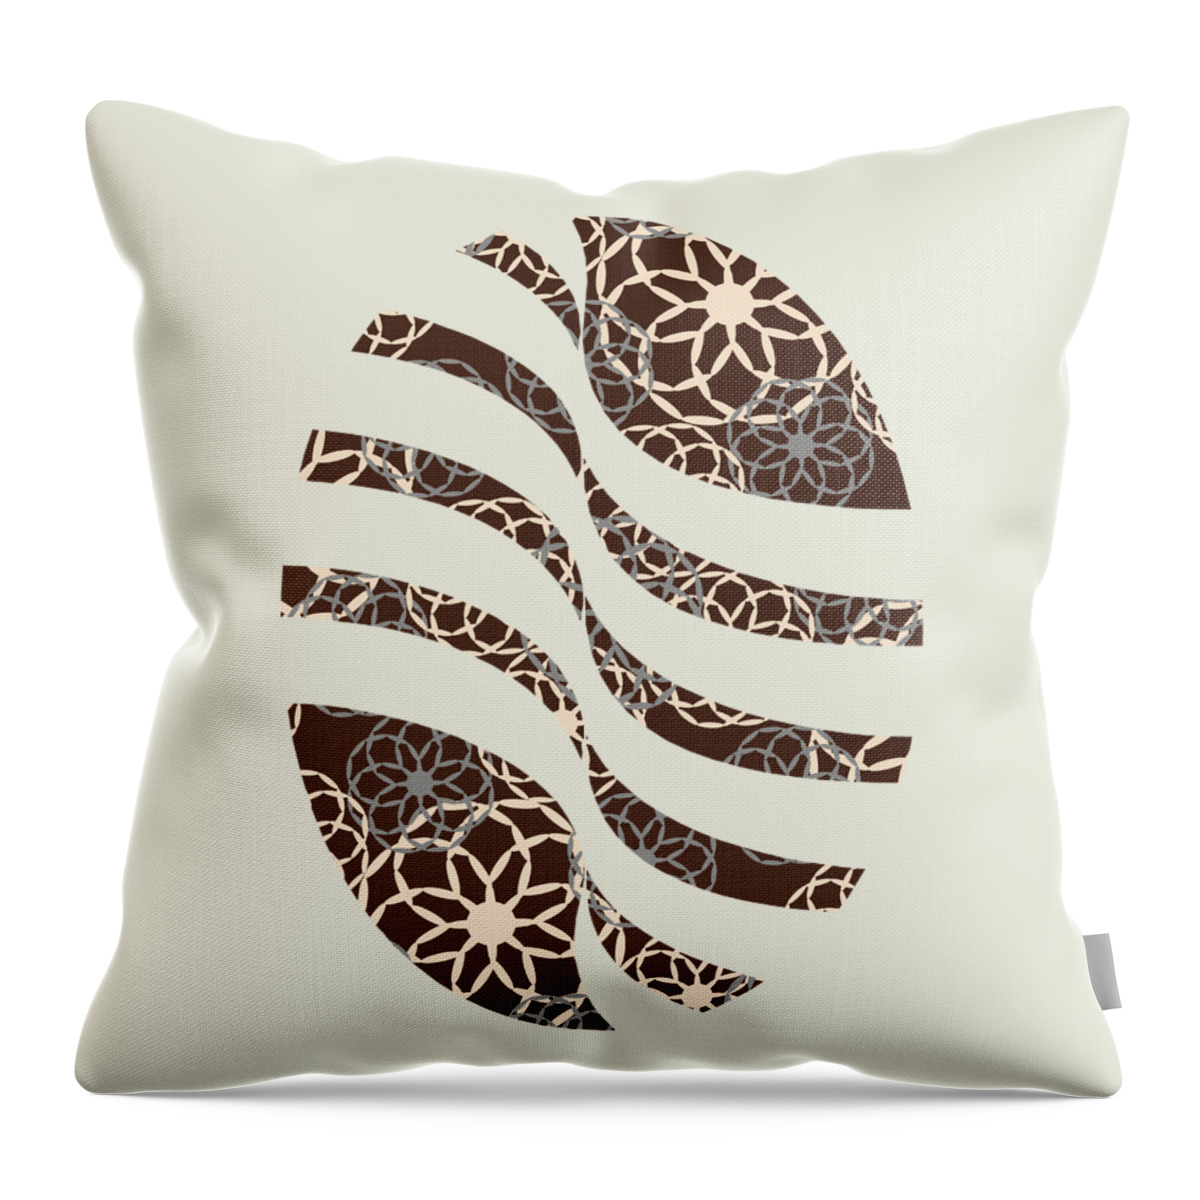 Floral Pattern Throw Pillow featuring the mixed media Brown and Silver Floral Pattern Art by Christina Rollo